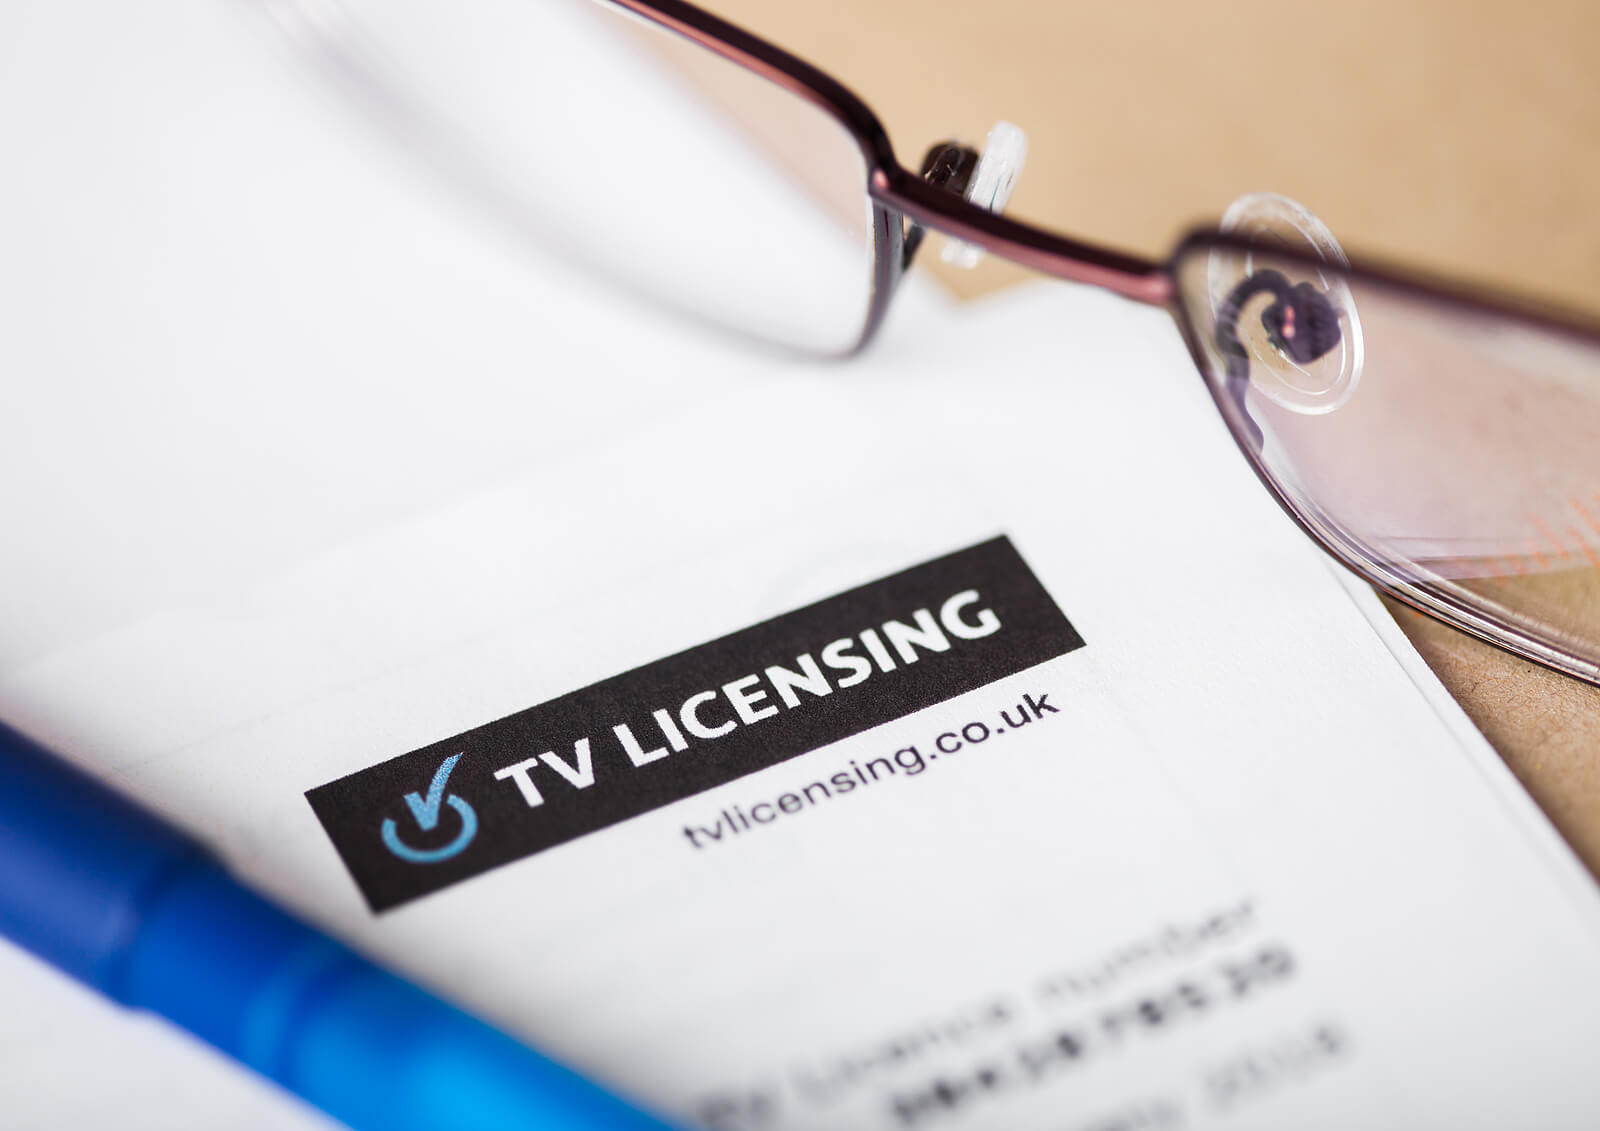 A close-up of a letter from TV Licensing about a TV licence, with spectacles and a pen in shot